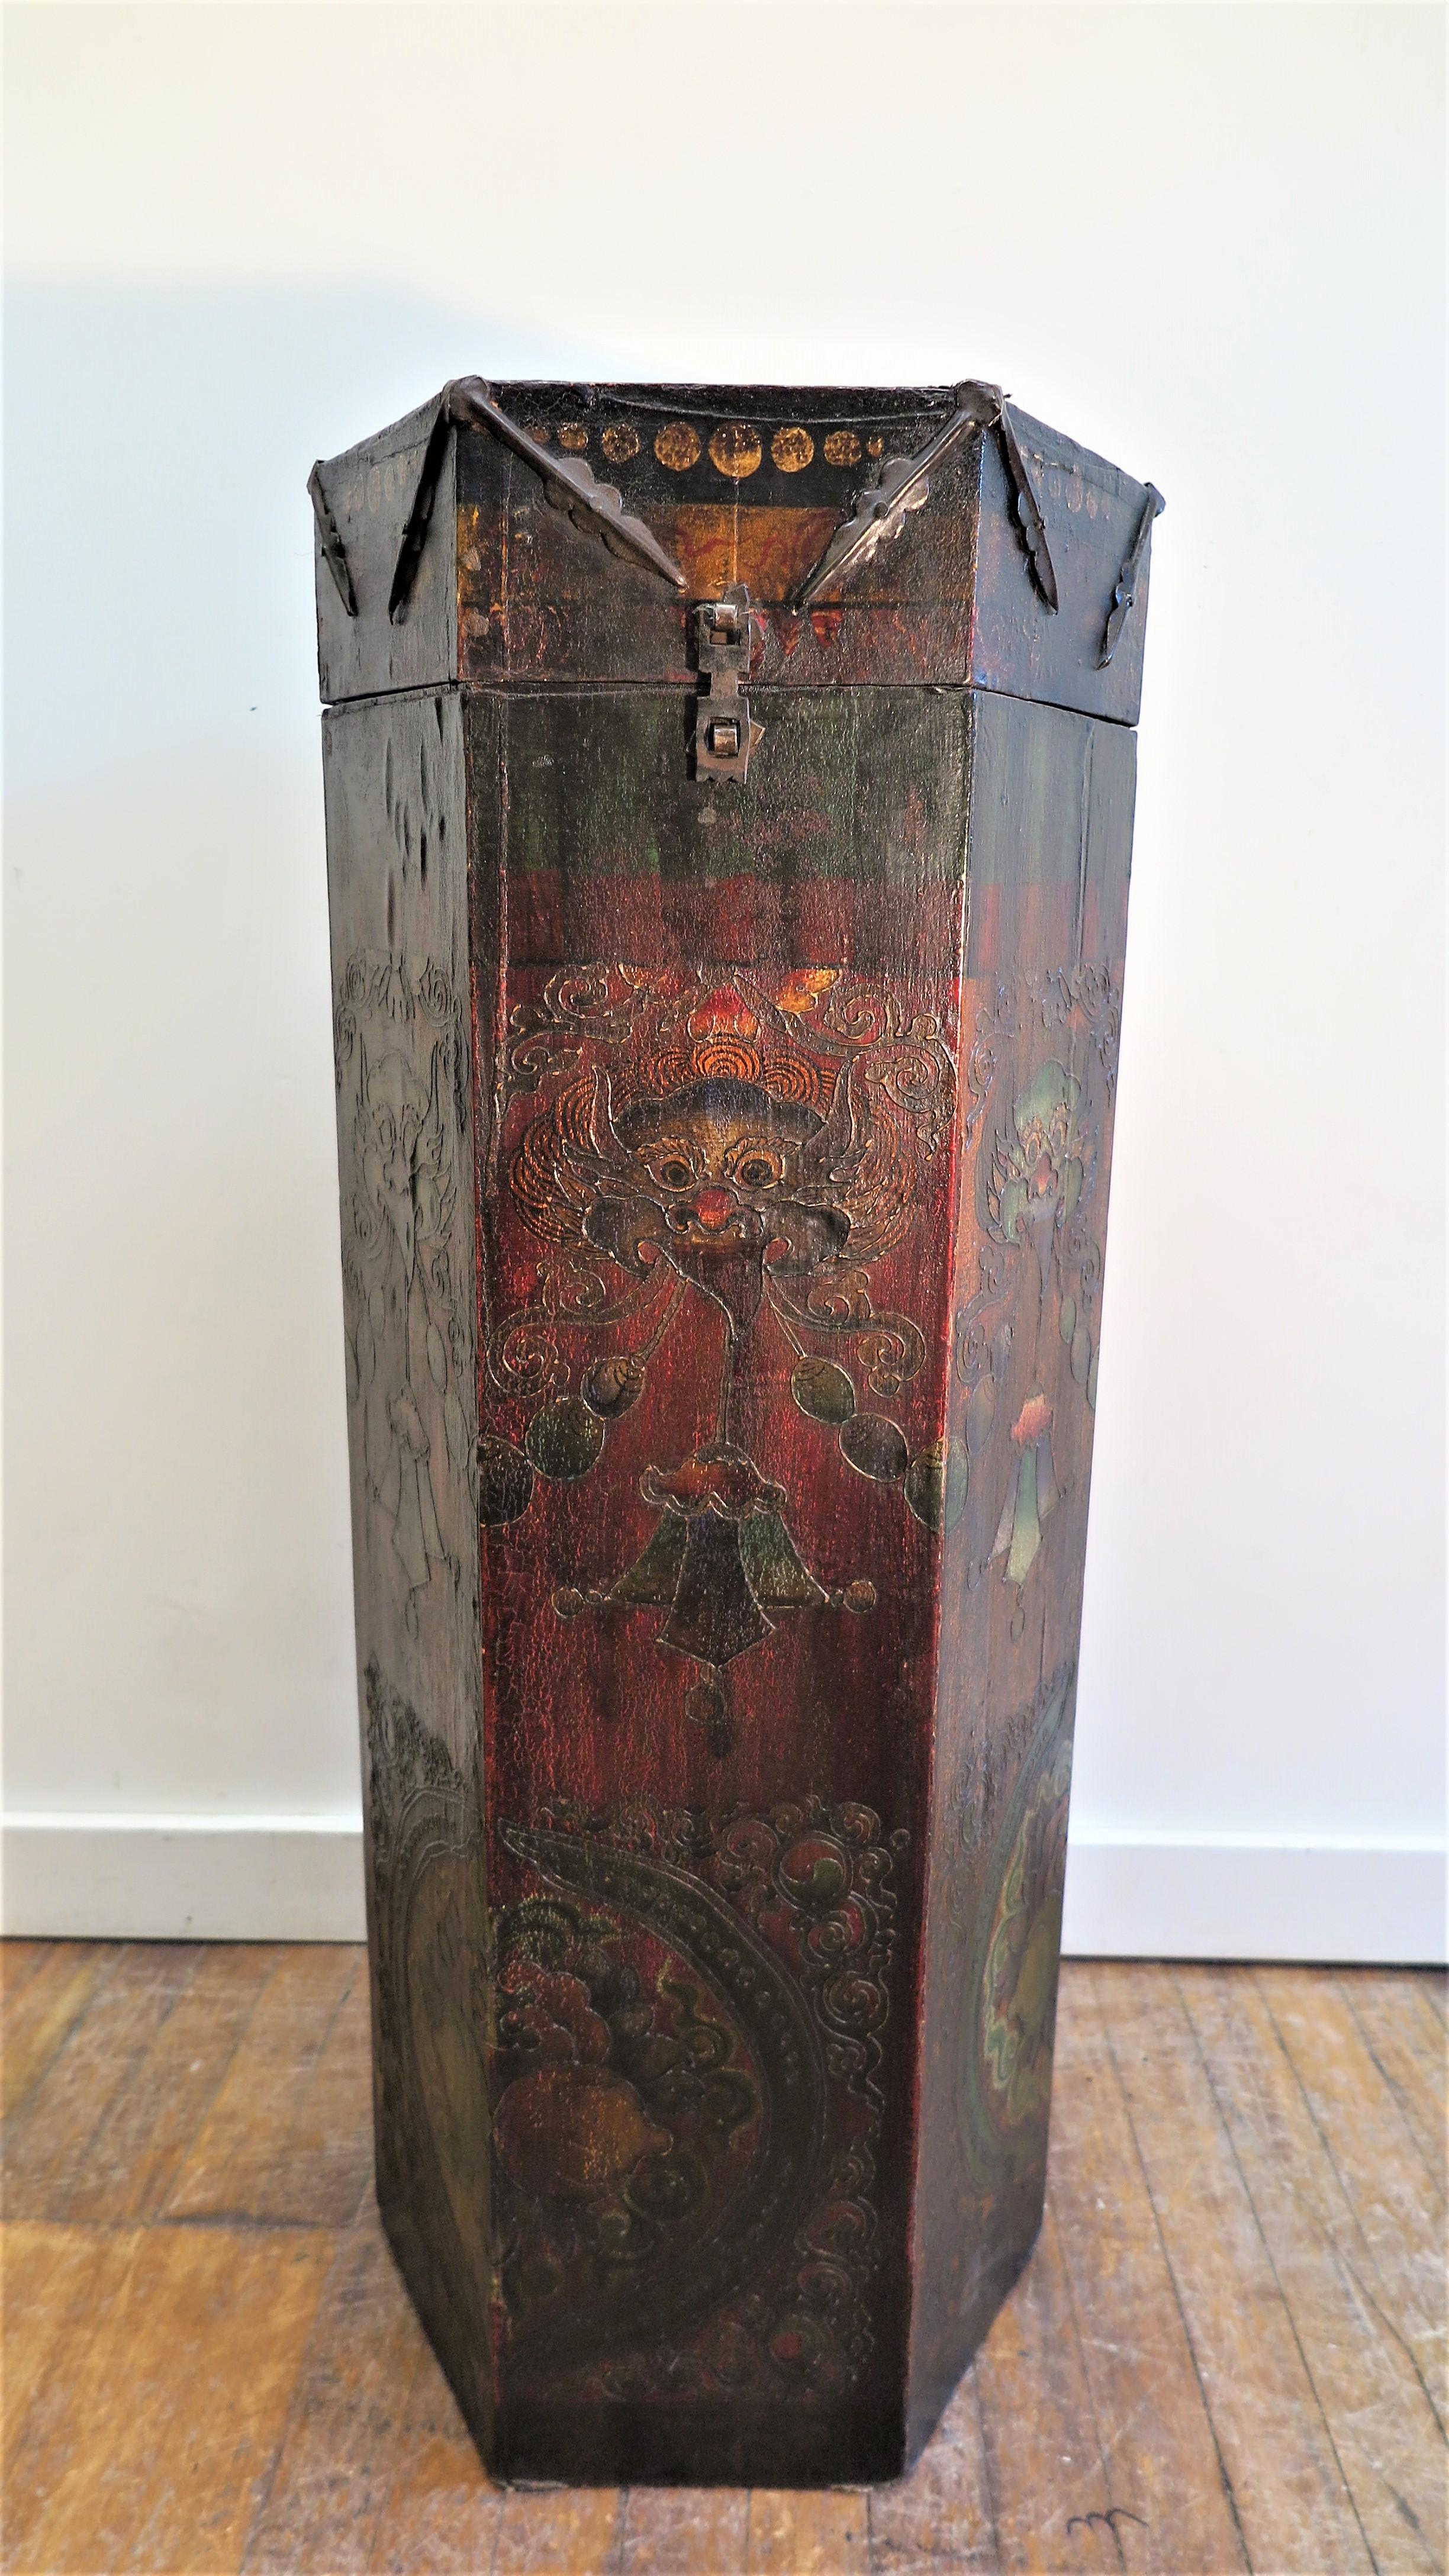 Tibetan hexagon Tonka scroll box. Hand made hexagon box covered in leather hand painted. Traditional Tibetan art work hand painted with raised outlining of Jambhala face, Tibetan Jewels, and Yin Yang symbols adorn all six sides of this box. Used to